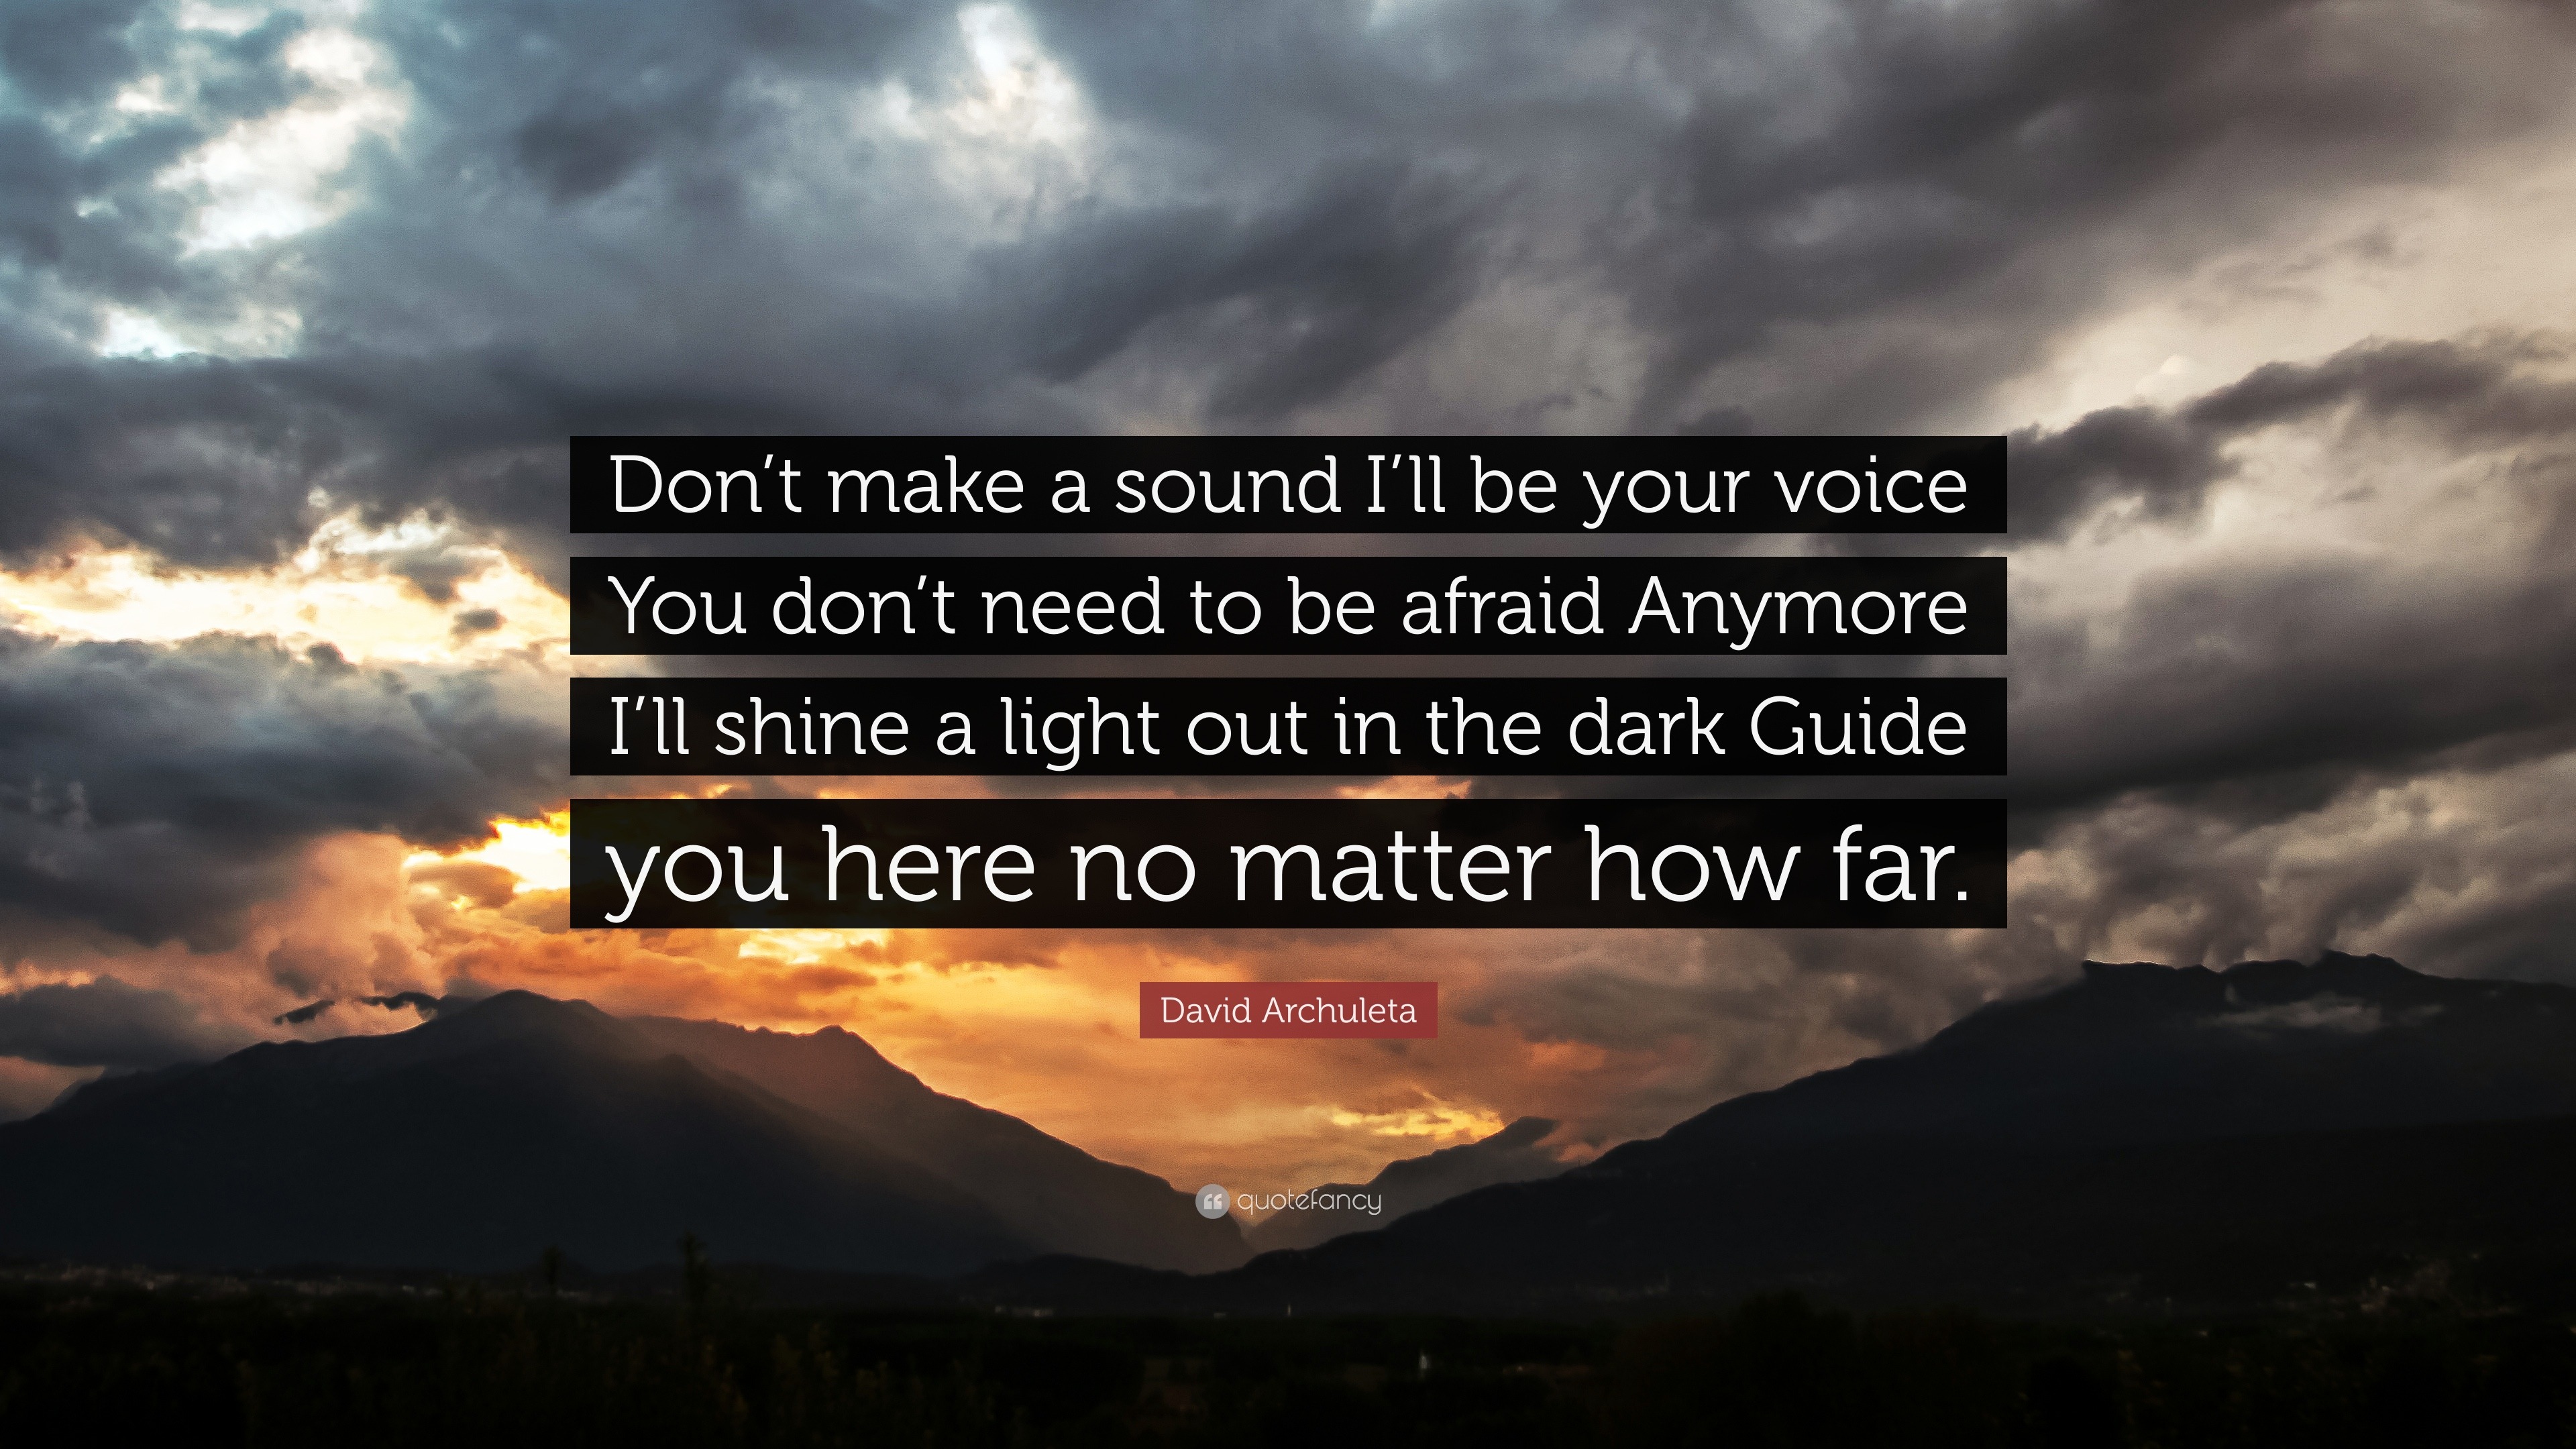 David Archuleta “Don't make a I'll be your voice don't need to be afraid Anymore I'll shine a out in the dark Guide you h...”